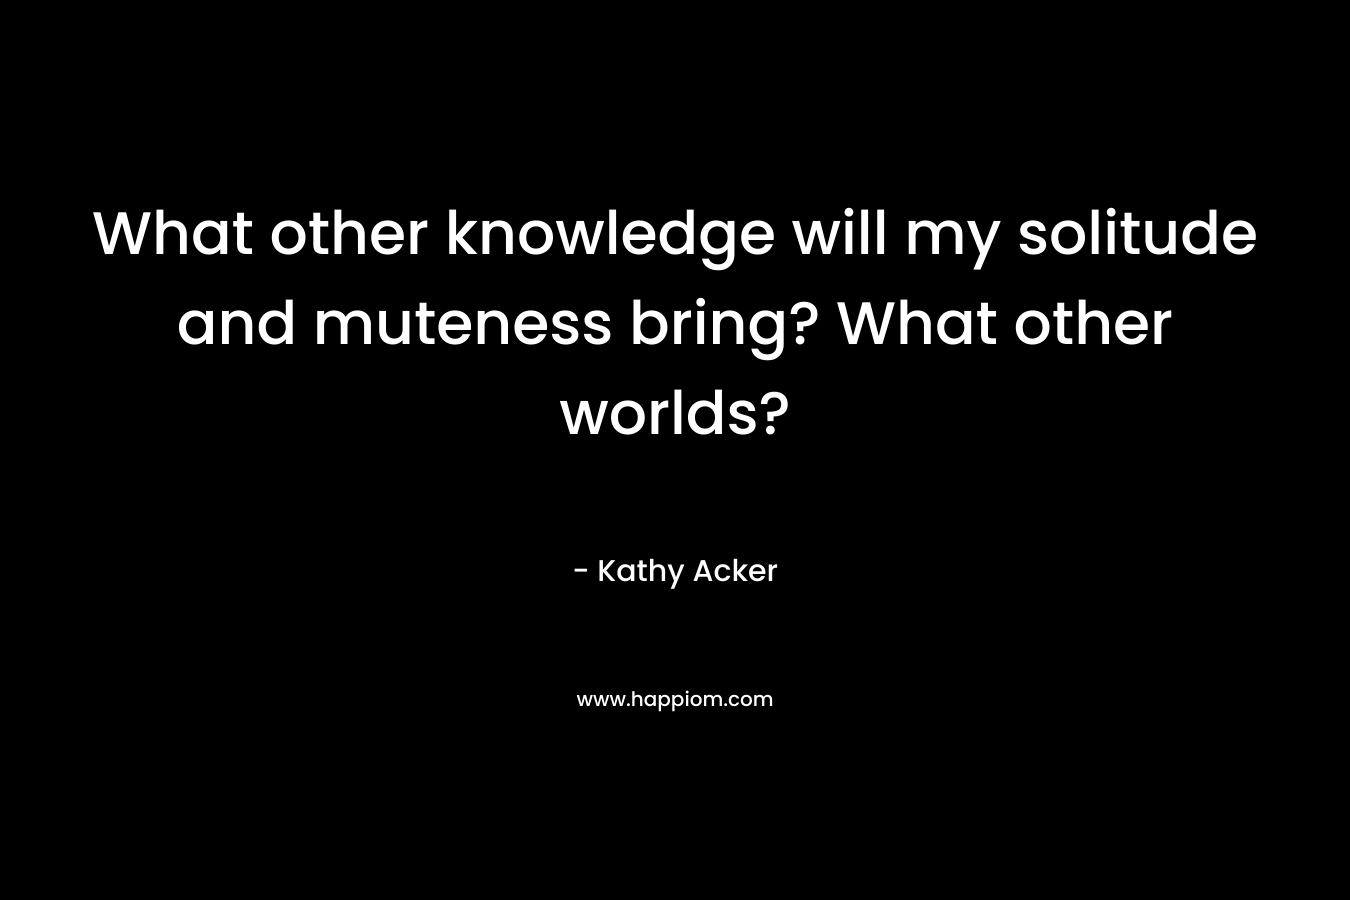 What other knowledge will my solitude and muteness bring? What other worlds?